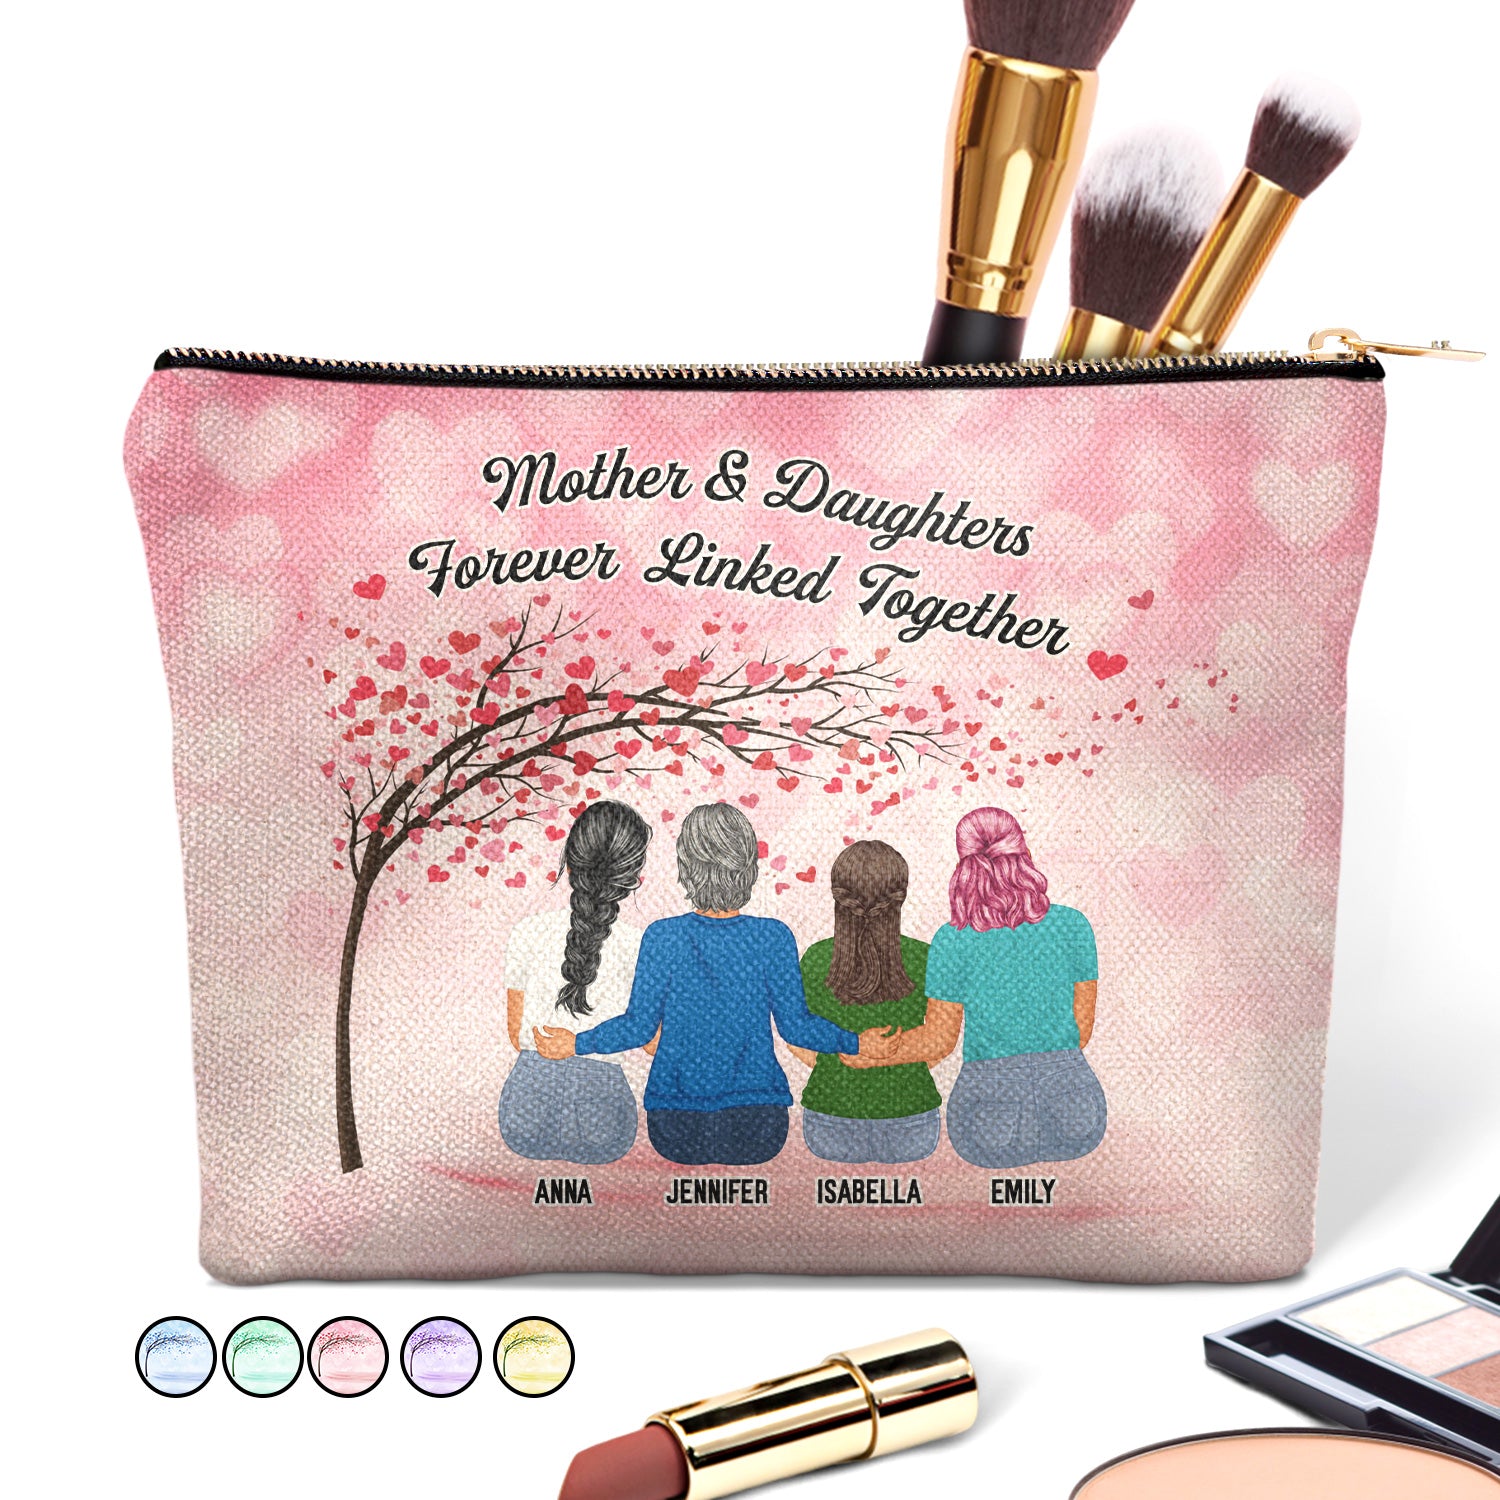 Mother & Daughters Forever Linked Together - Birthday, Loving Gift For Mom, Mum - Personalized Cosmetic Bag